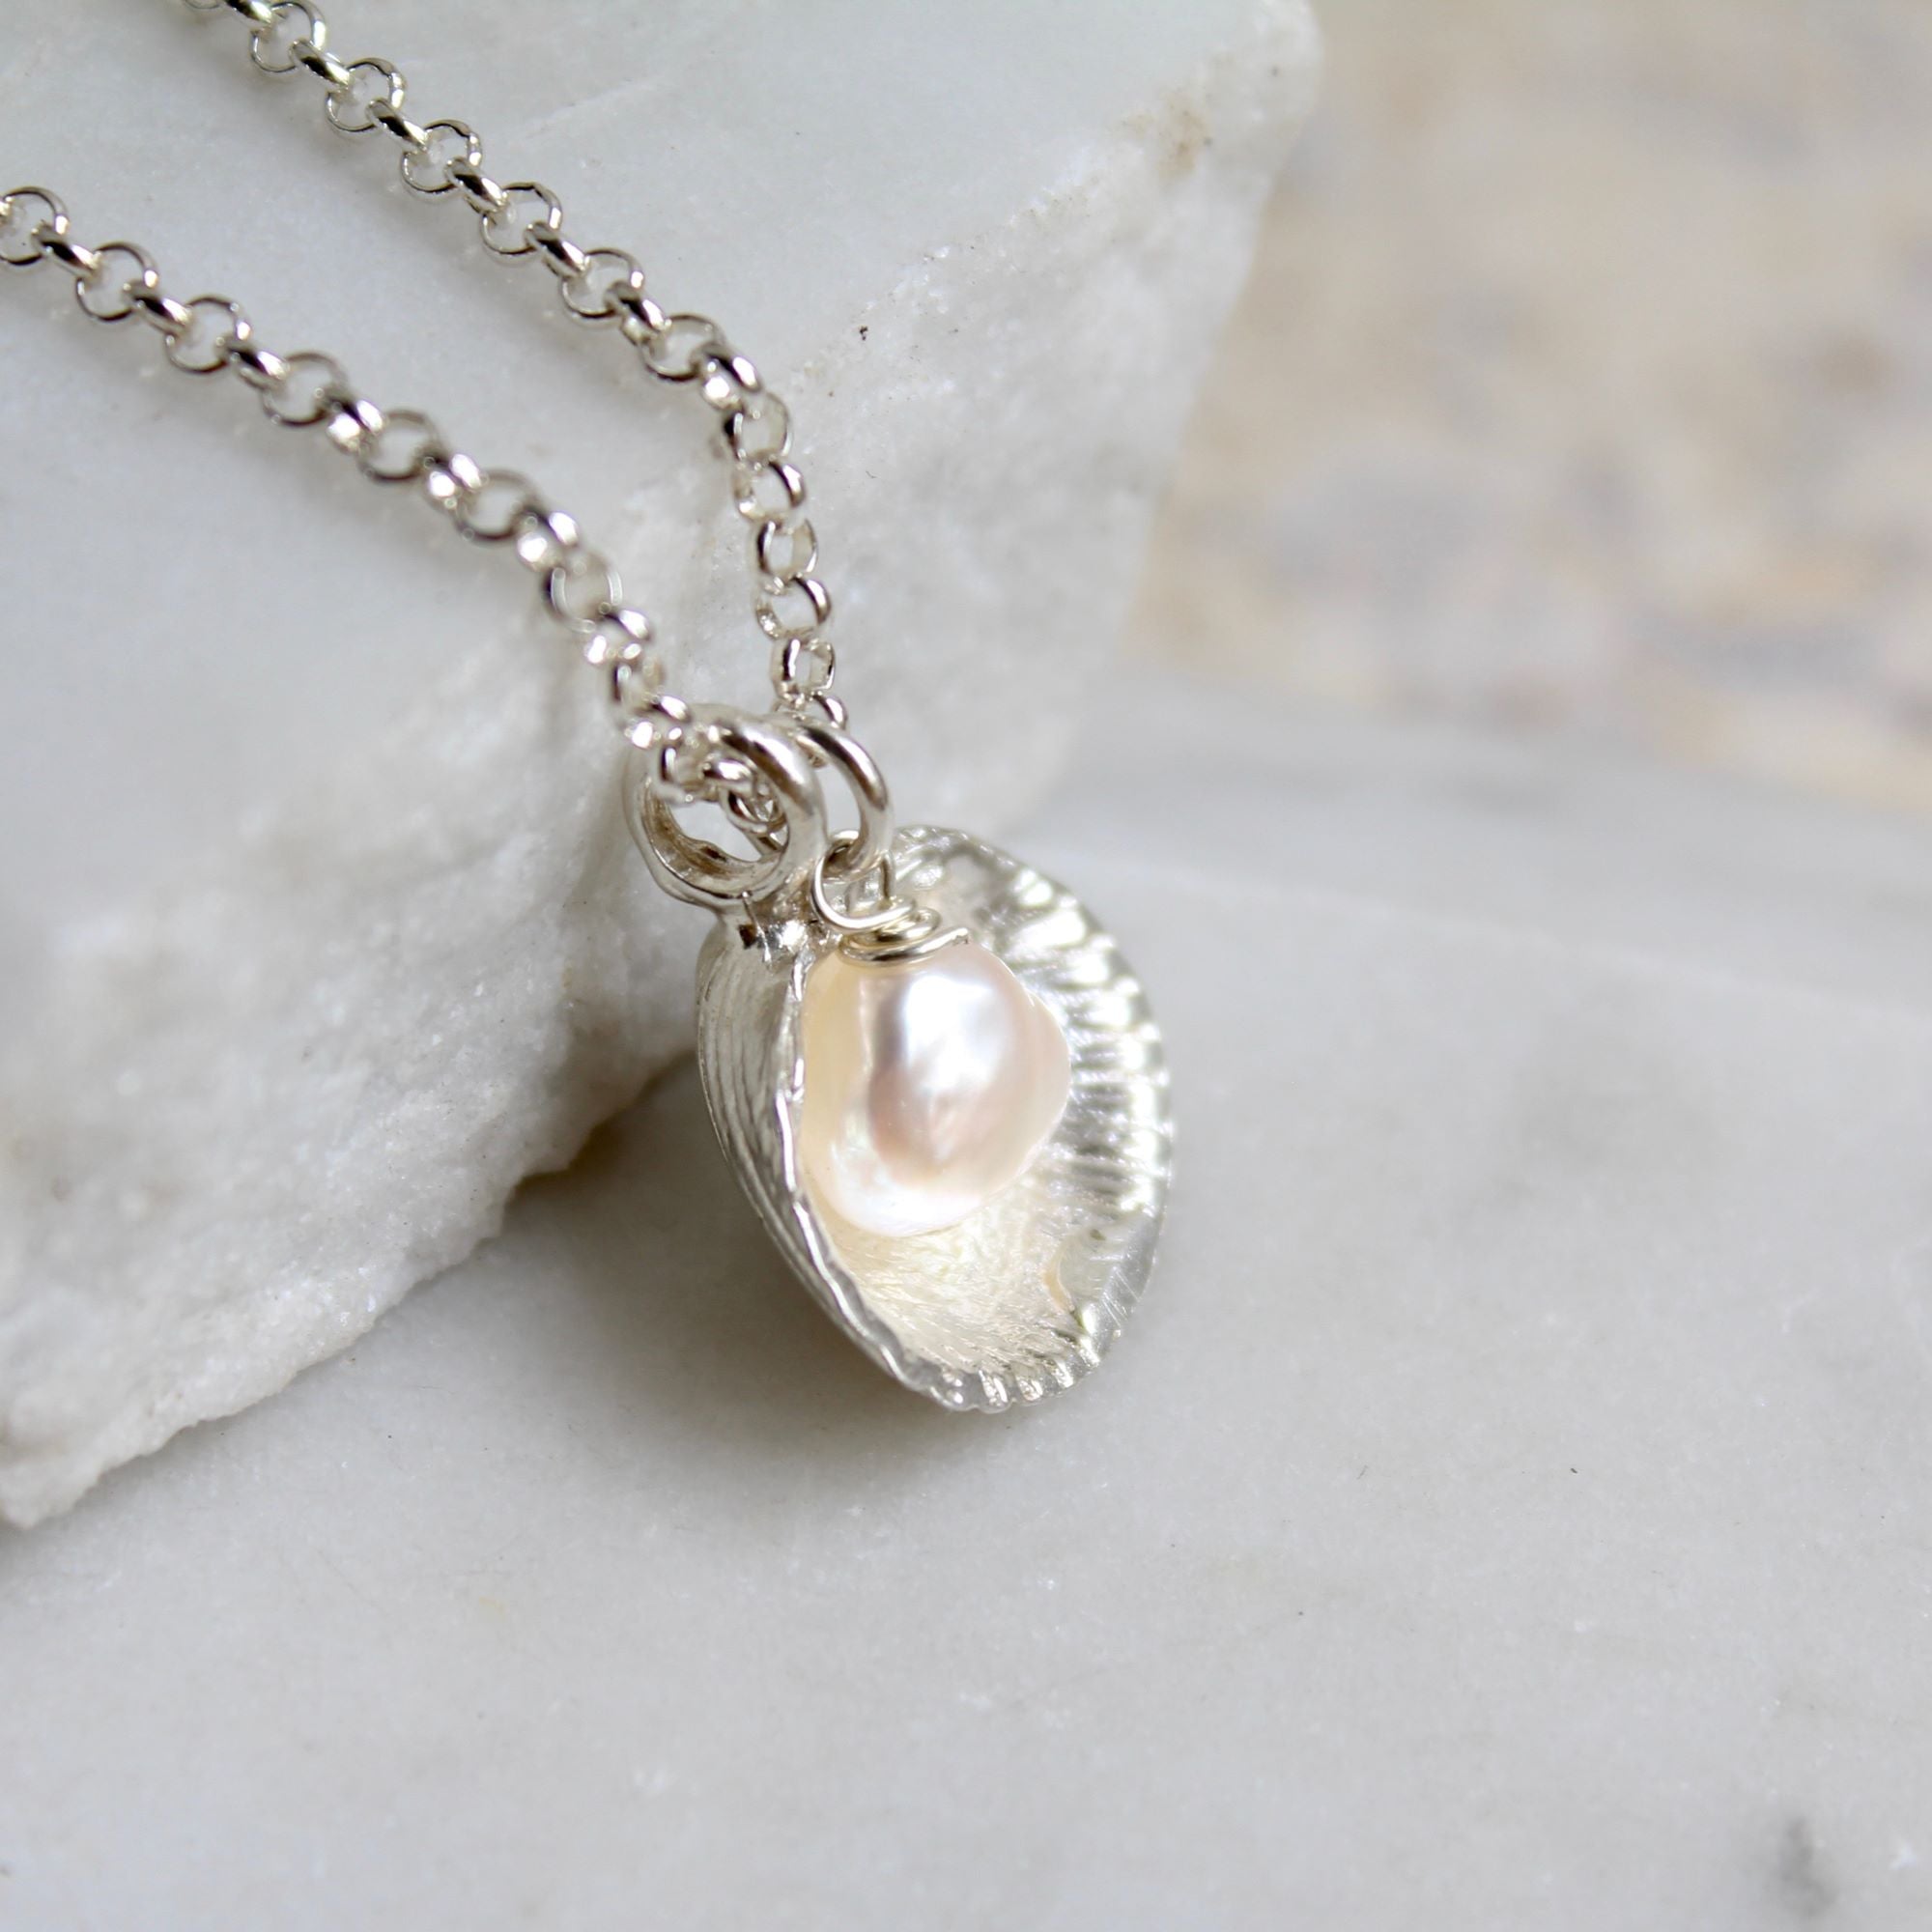 Venus Shell and Pearl Necklace Sterling Silver